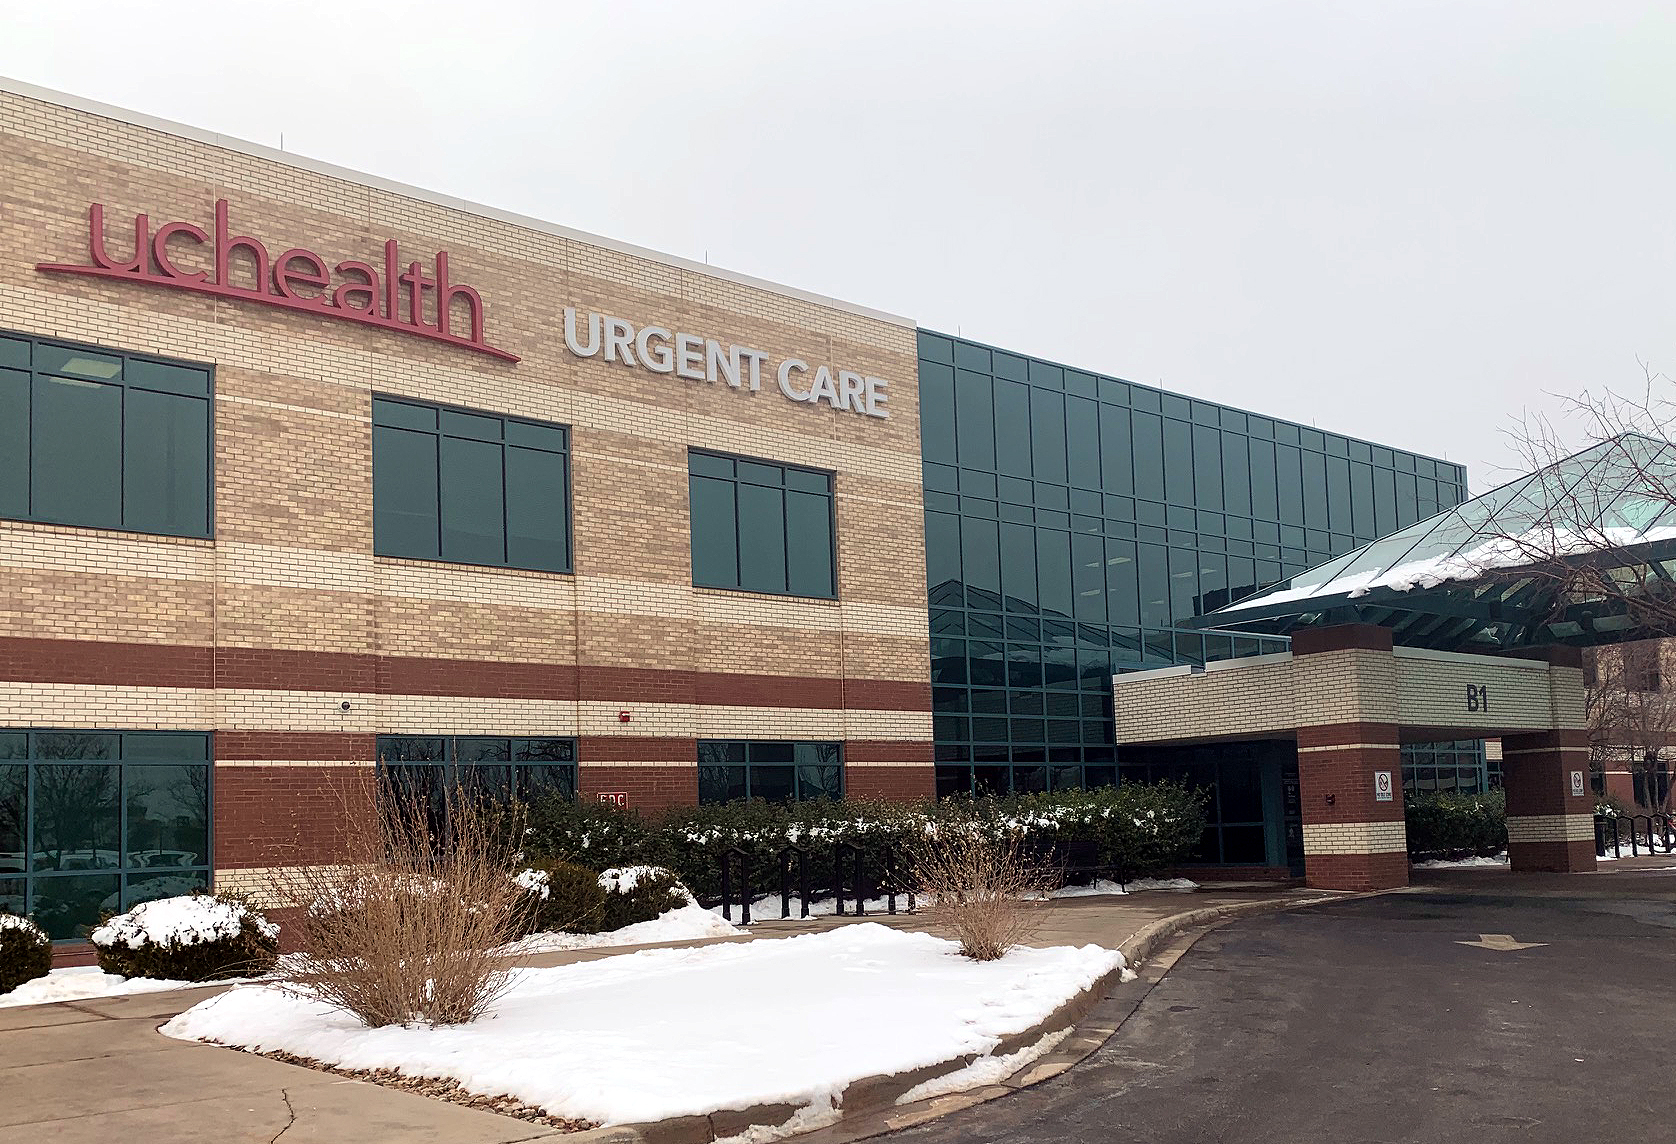 PHOTO: Seen in this picture is the Colorado health care facility, UCHealth Urgent Care Harmony Campus, where Keith Alexander went thinking he had kidney stones, and walked out with a cancer diagnosis.